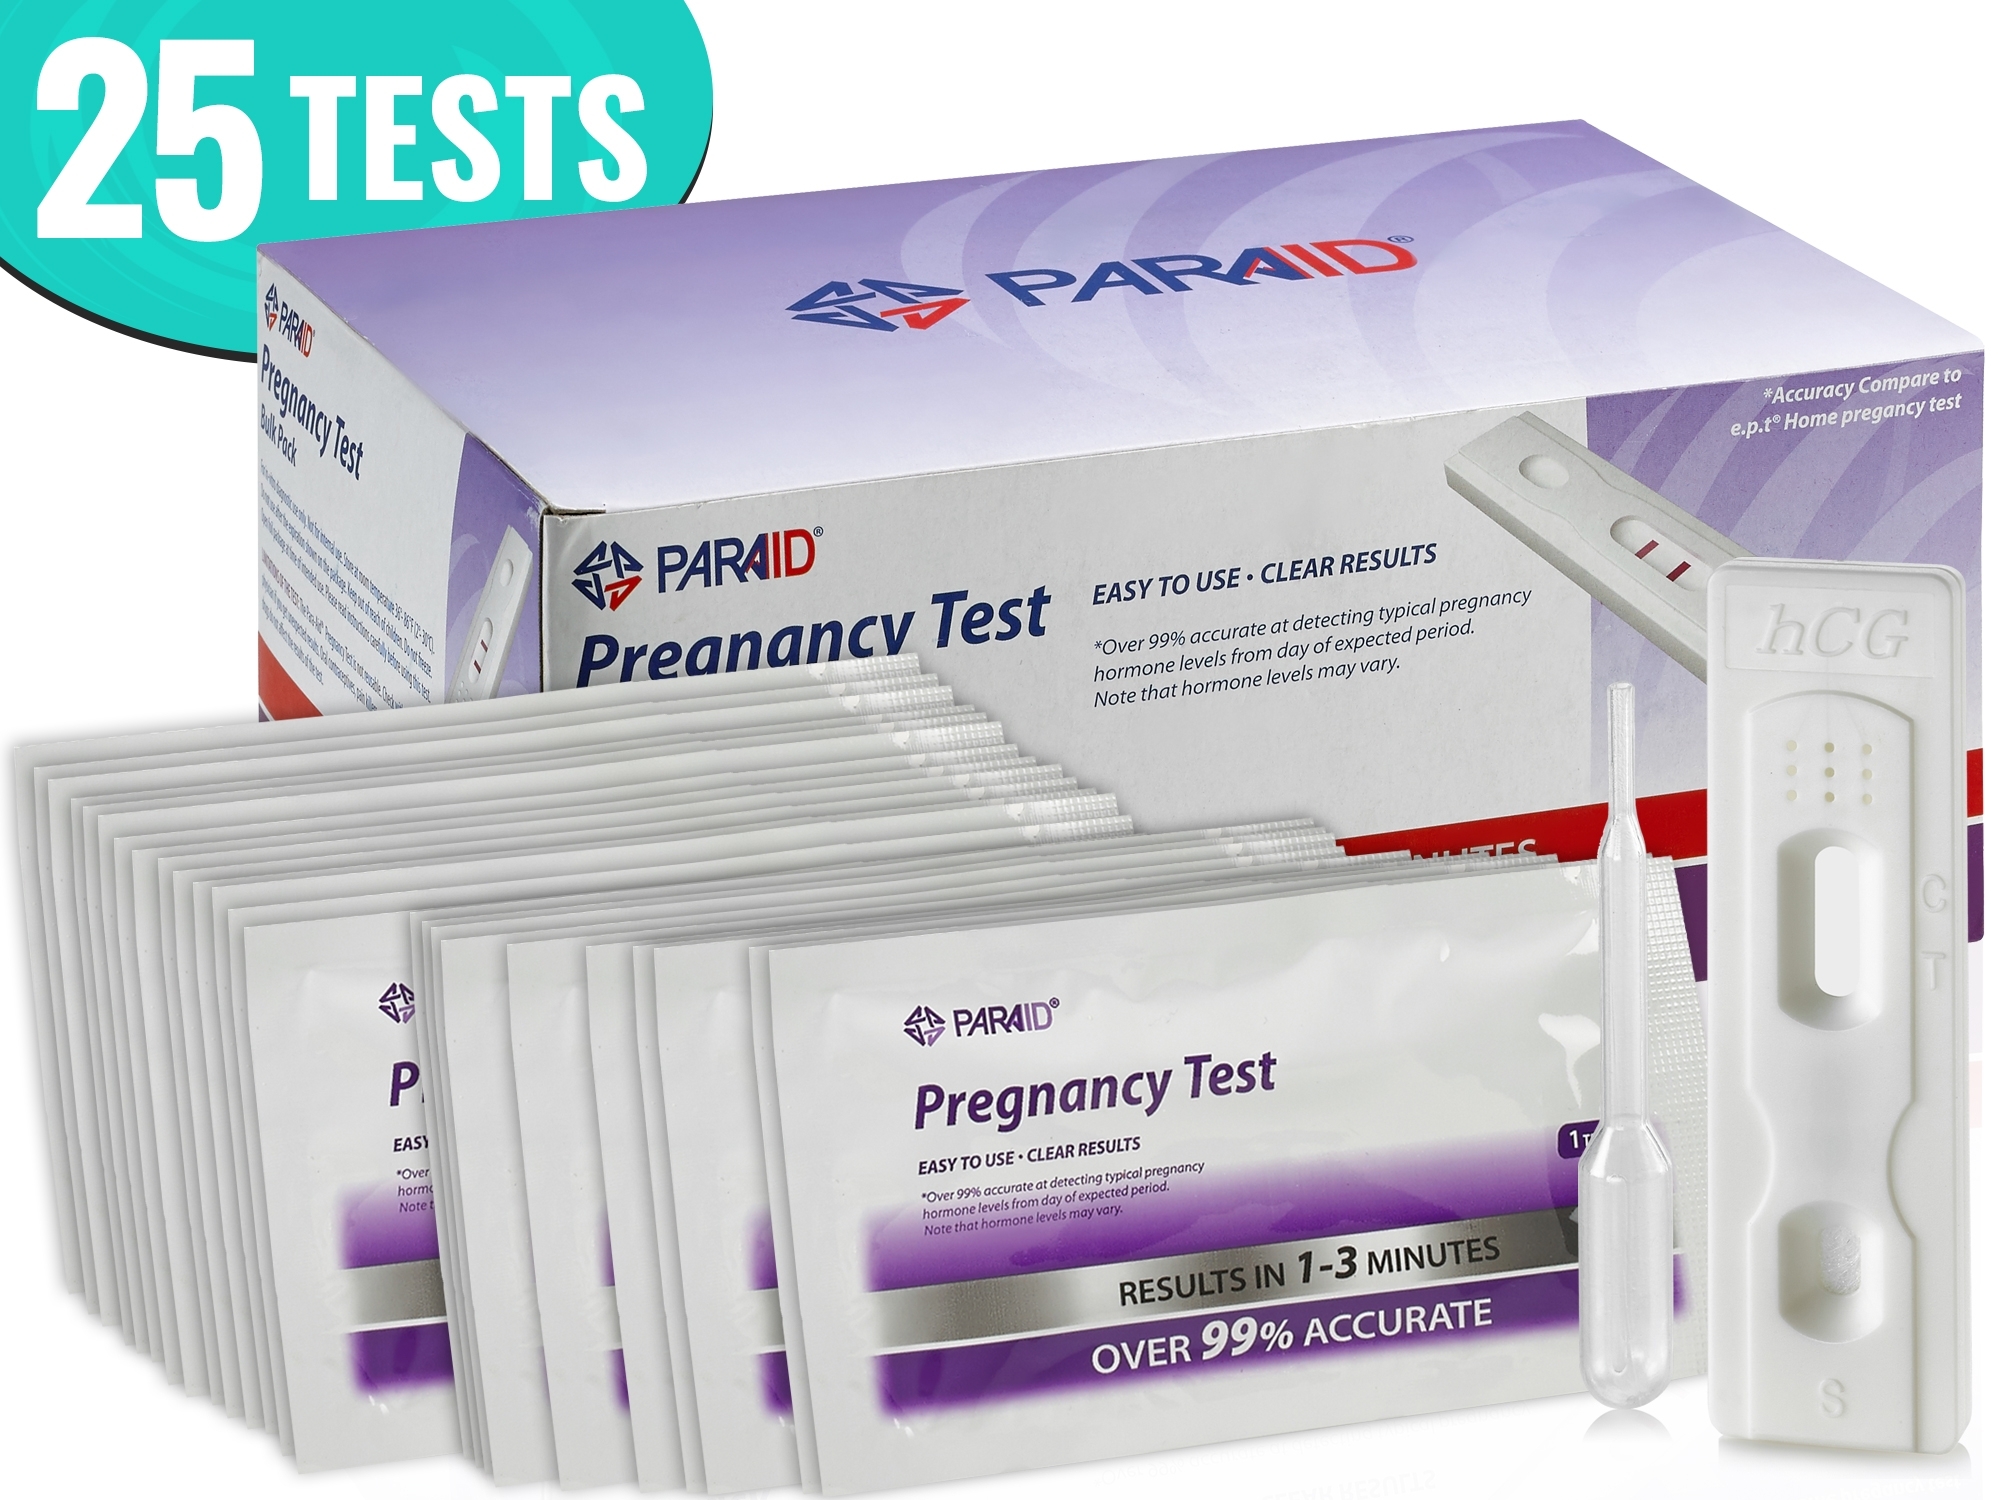 Early Detection Urine Test Kit (Hcg) - Pregnancy Test Strips In Bulk with Pregnancy Strips Day By Day